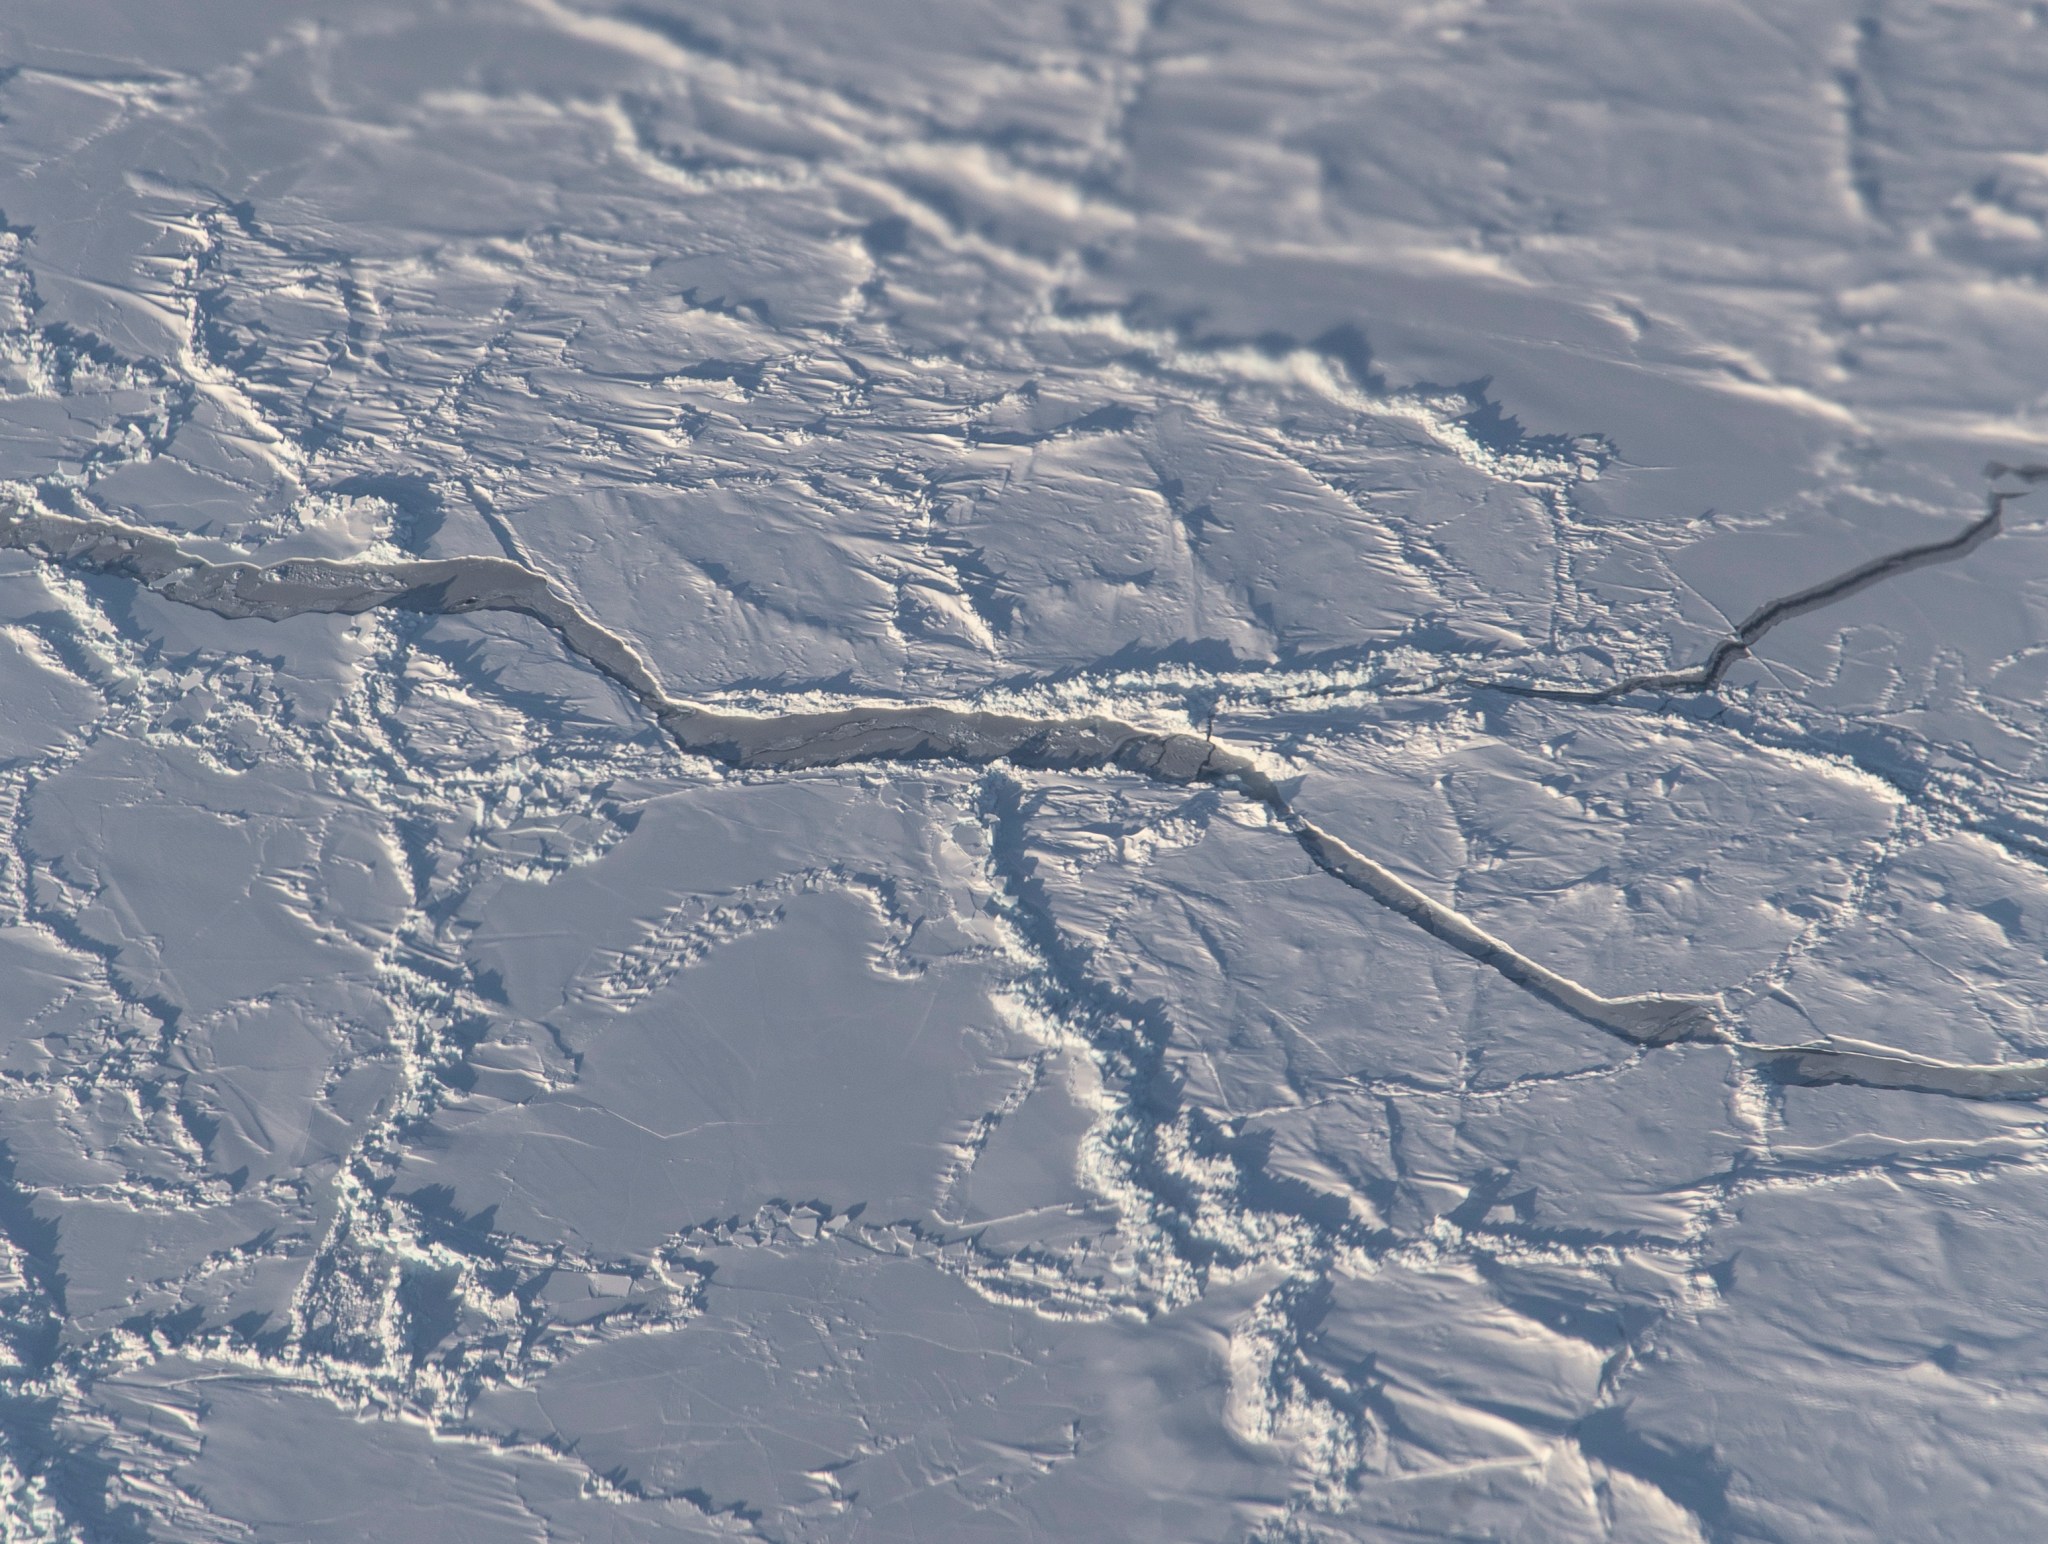 Arctic sea ice, with ridges and cracks. The ice is blueish white and mostly flat, with jagged cracks and ridges running across it.